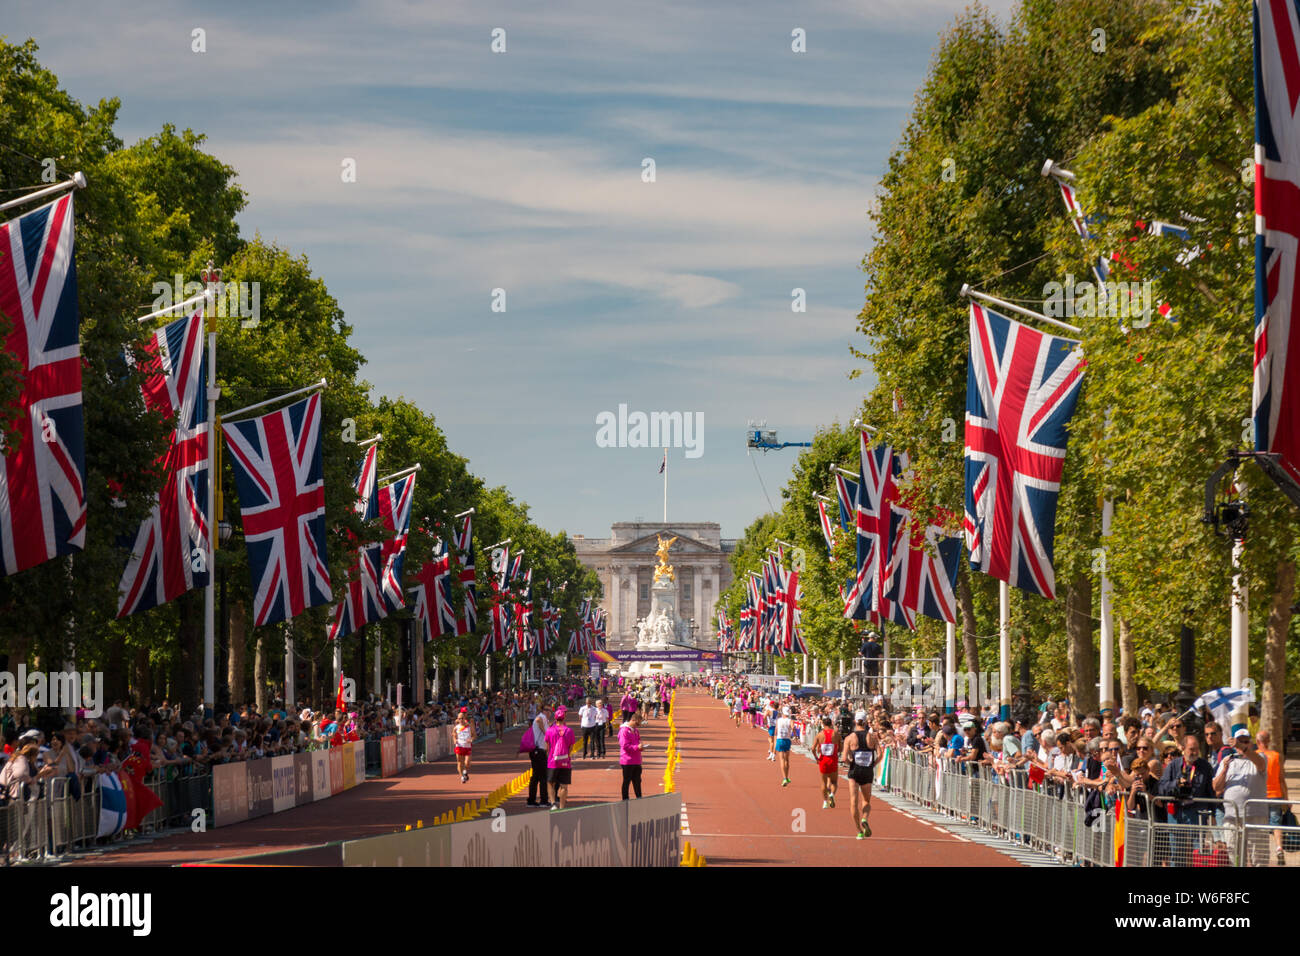 London, United Kingdom - August 13, 2017: The Mall decorated with Union Jack flags and Buckingham Palace at 50 km Race Walkers competing in the 2017 I Stock Photo